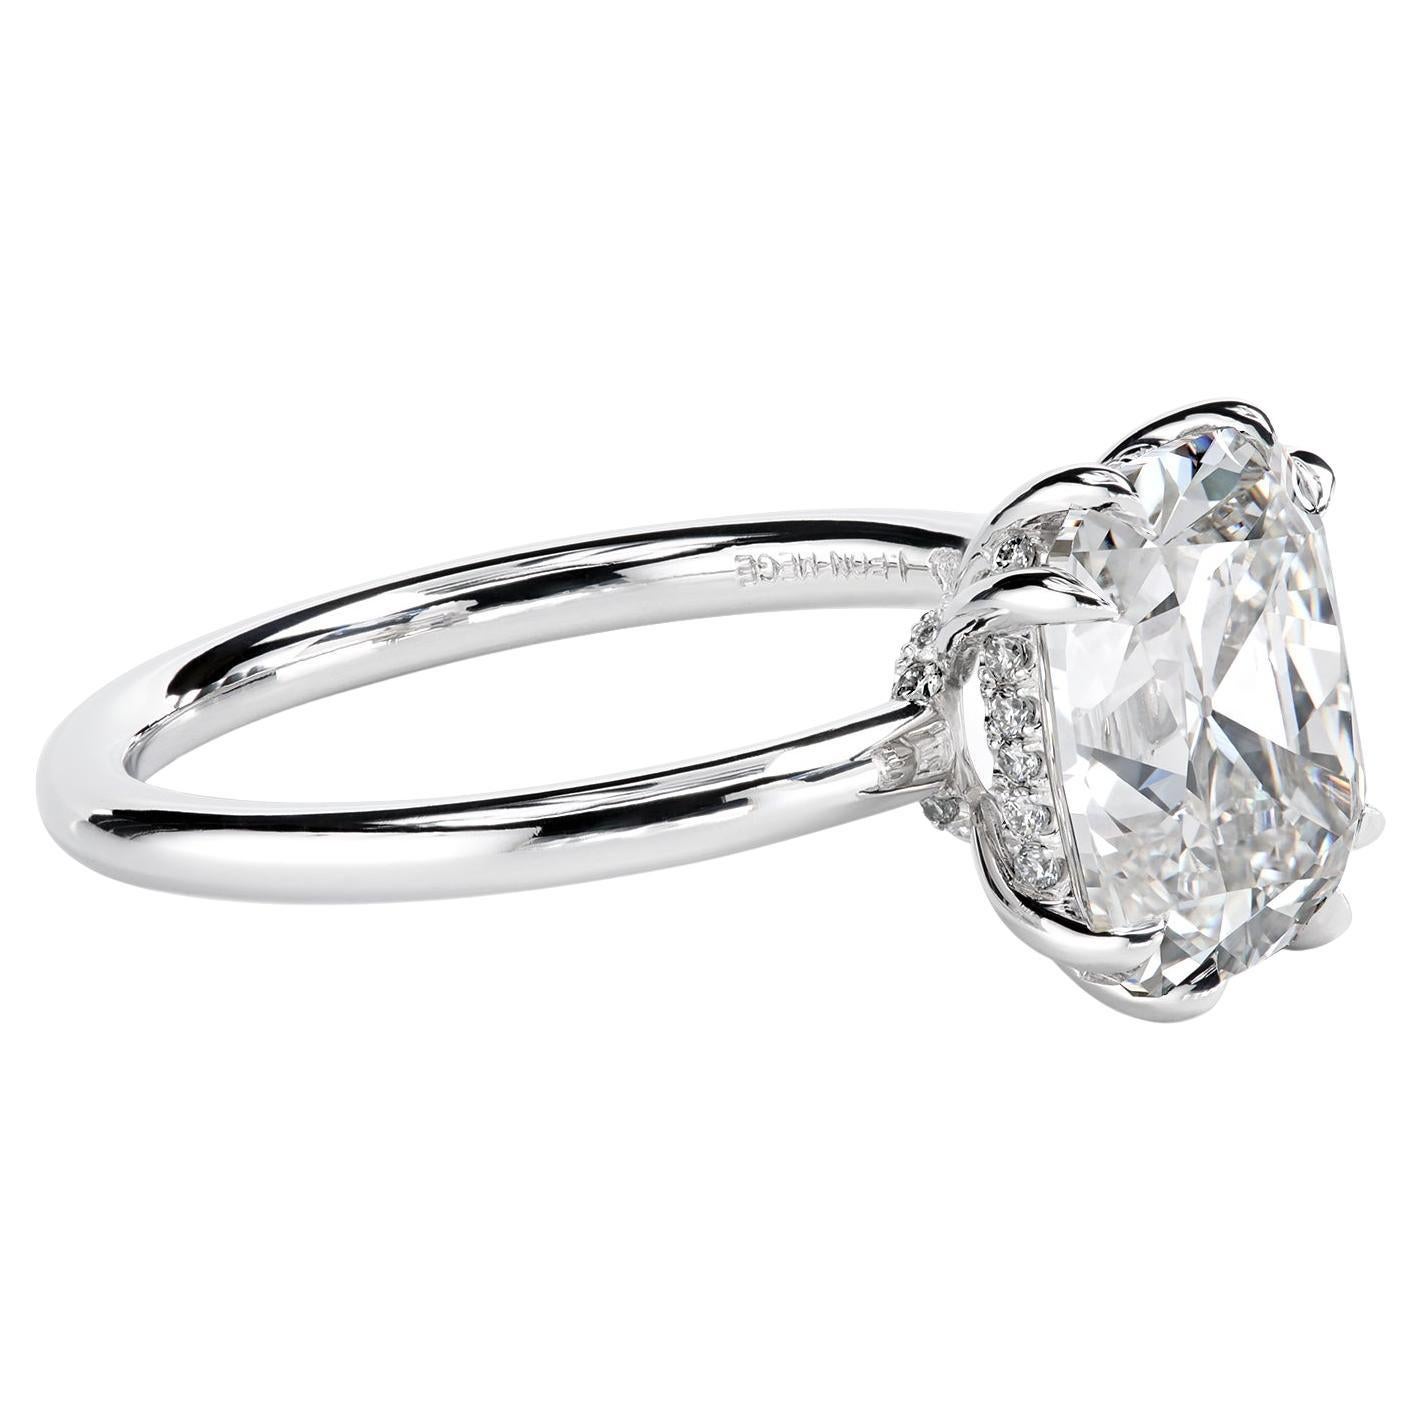 Leon Mege platinum hand-forged solitaire features a certified OMC diamond. For Sale